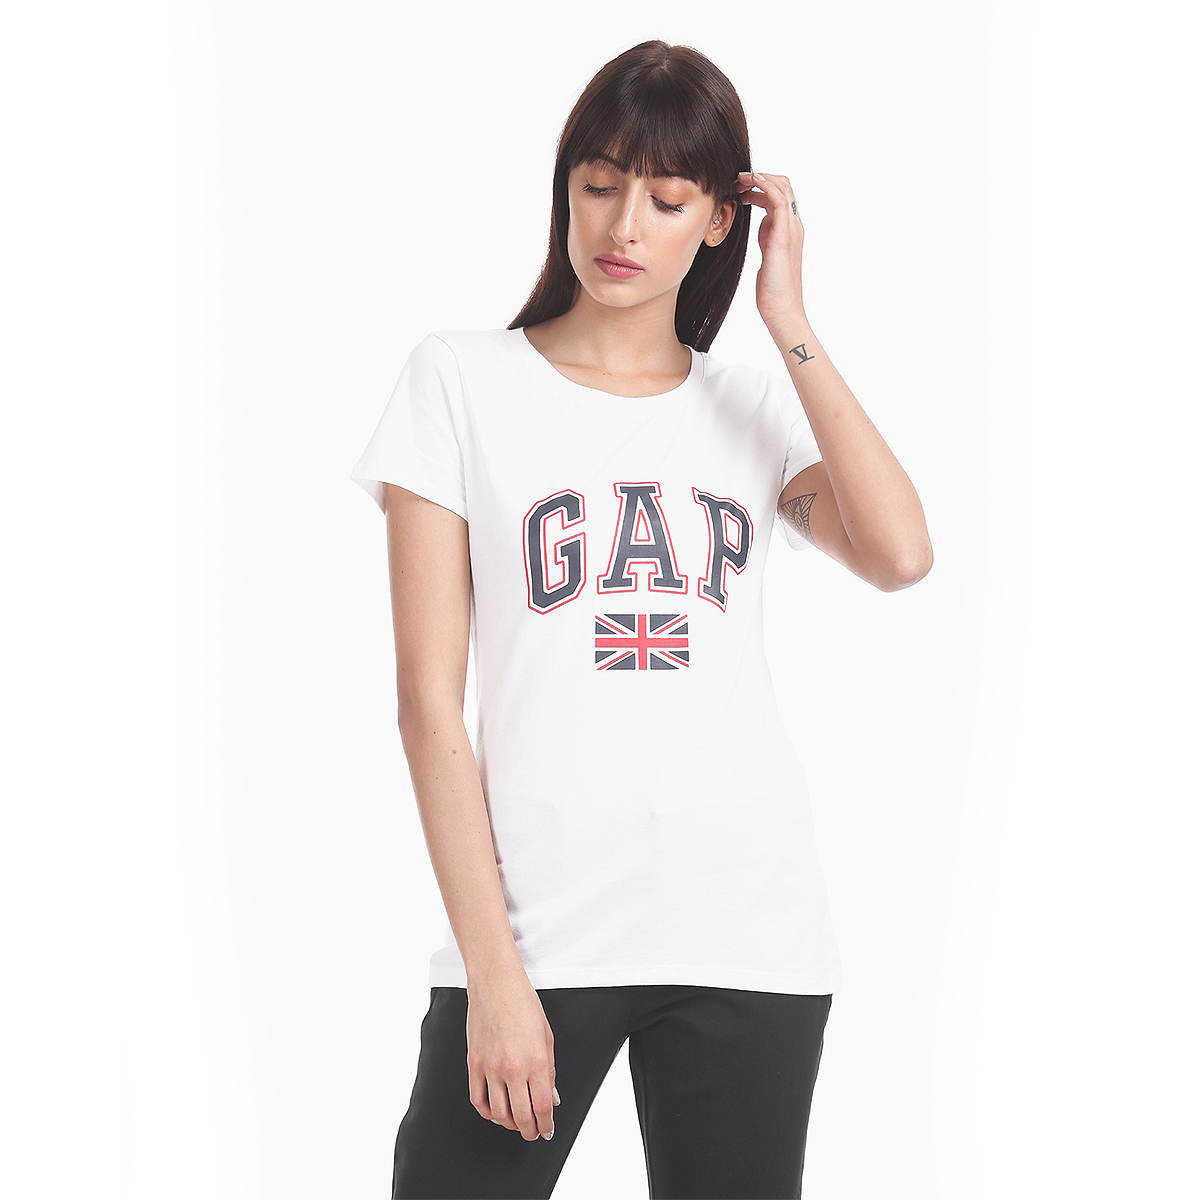 Gap Solid Color Regular Fit Crew Neck Short Sleeve T-Shirt with Screen Printed Logo & London Flag Graphic - White